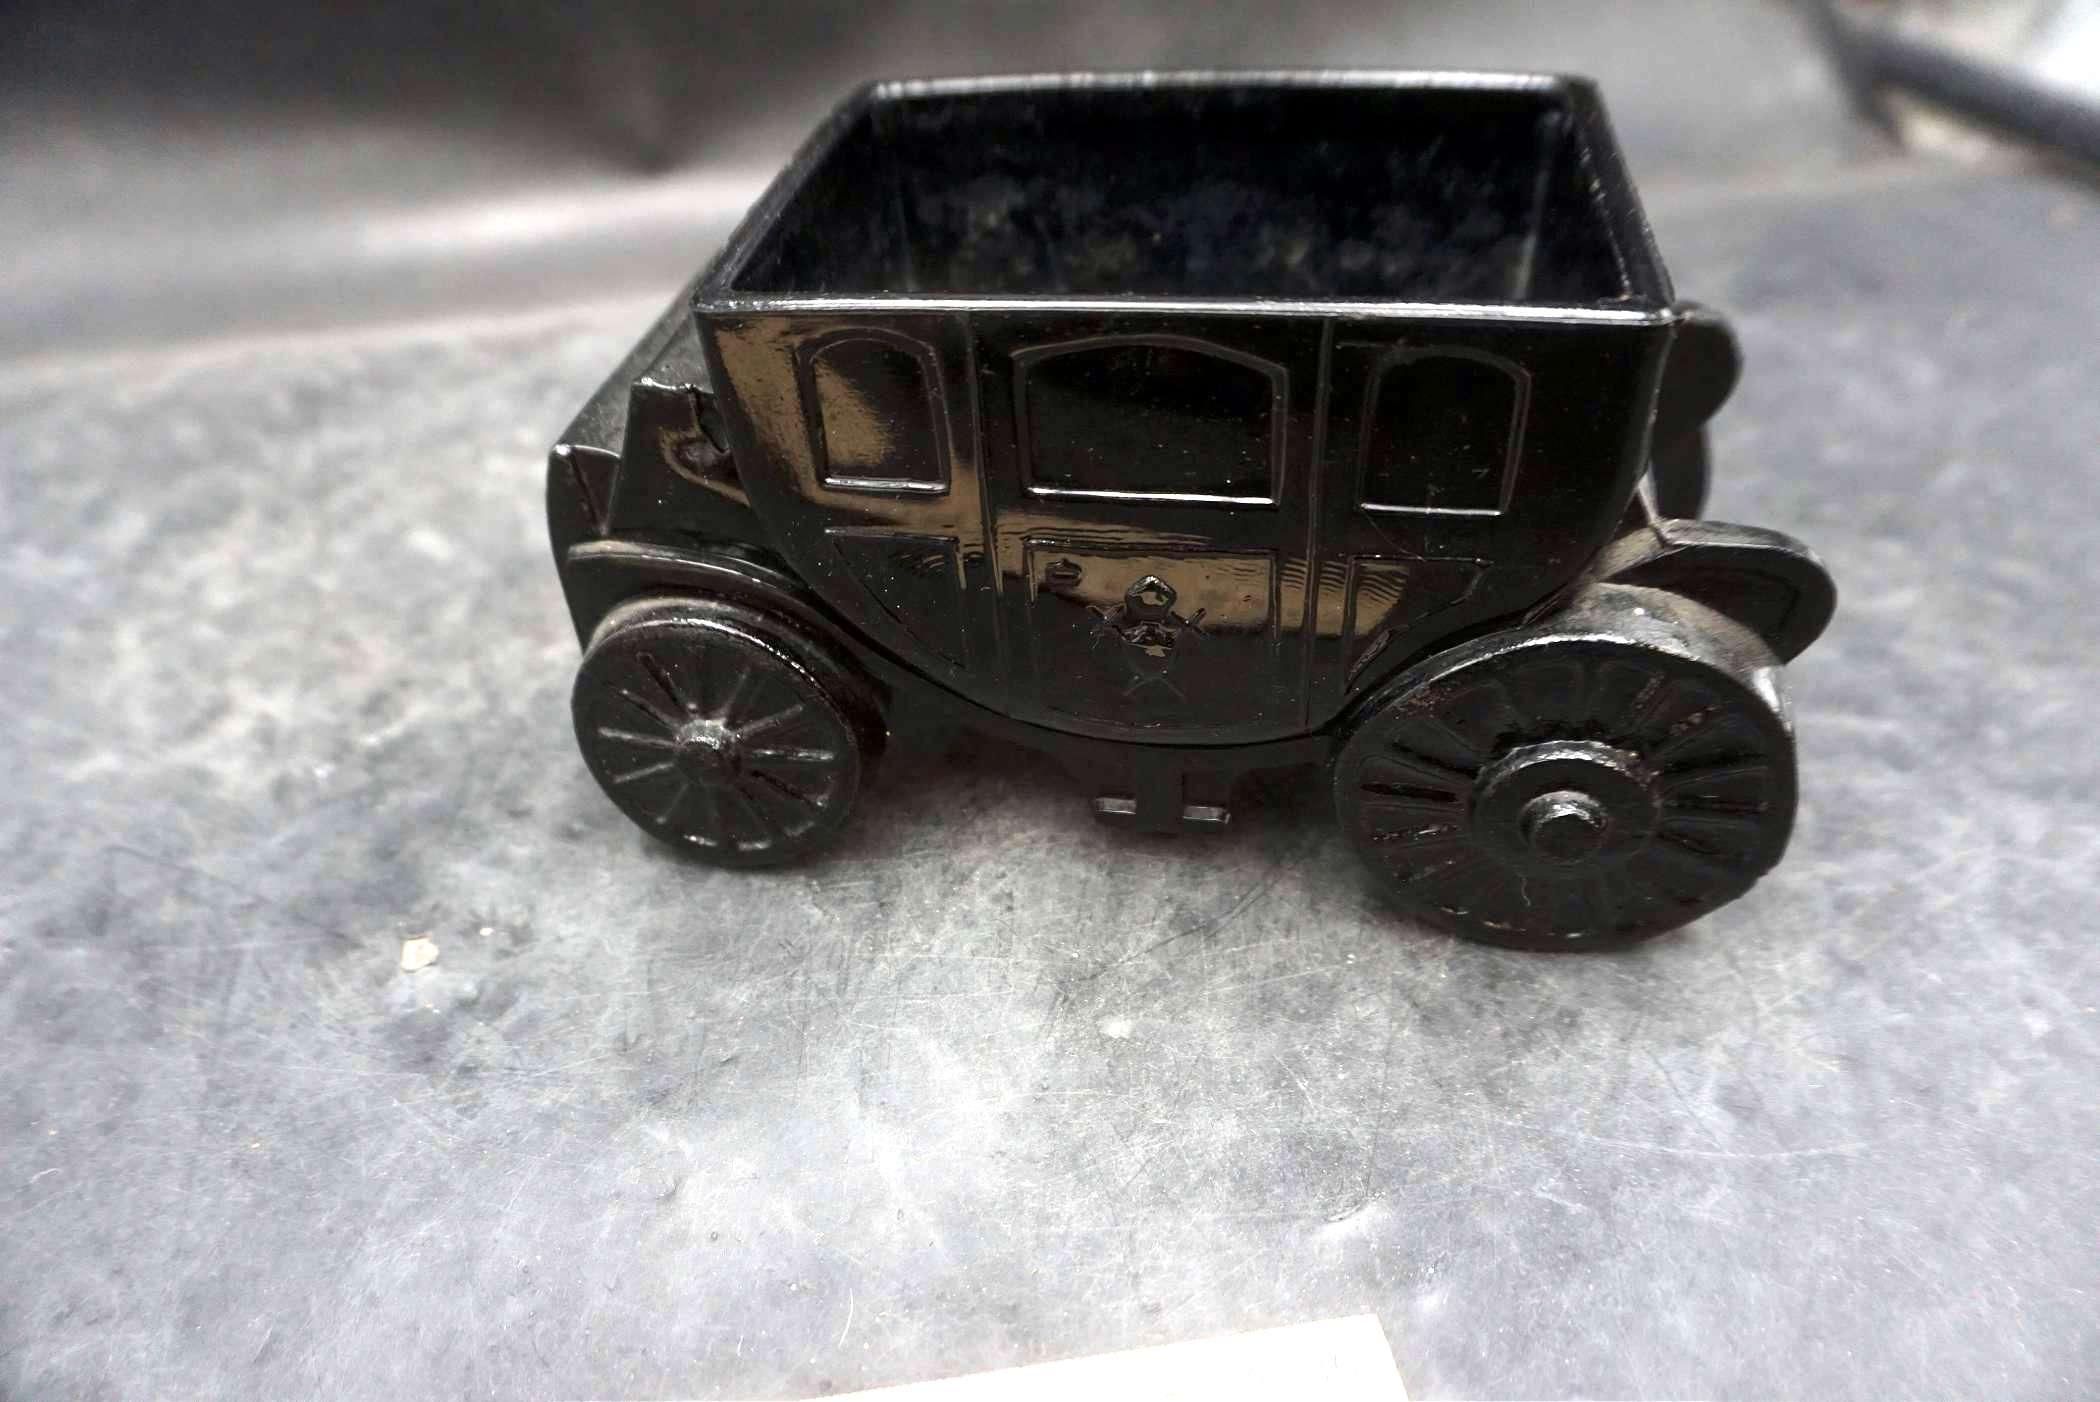 Black Carriage Planter (Chipped)